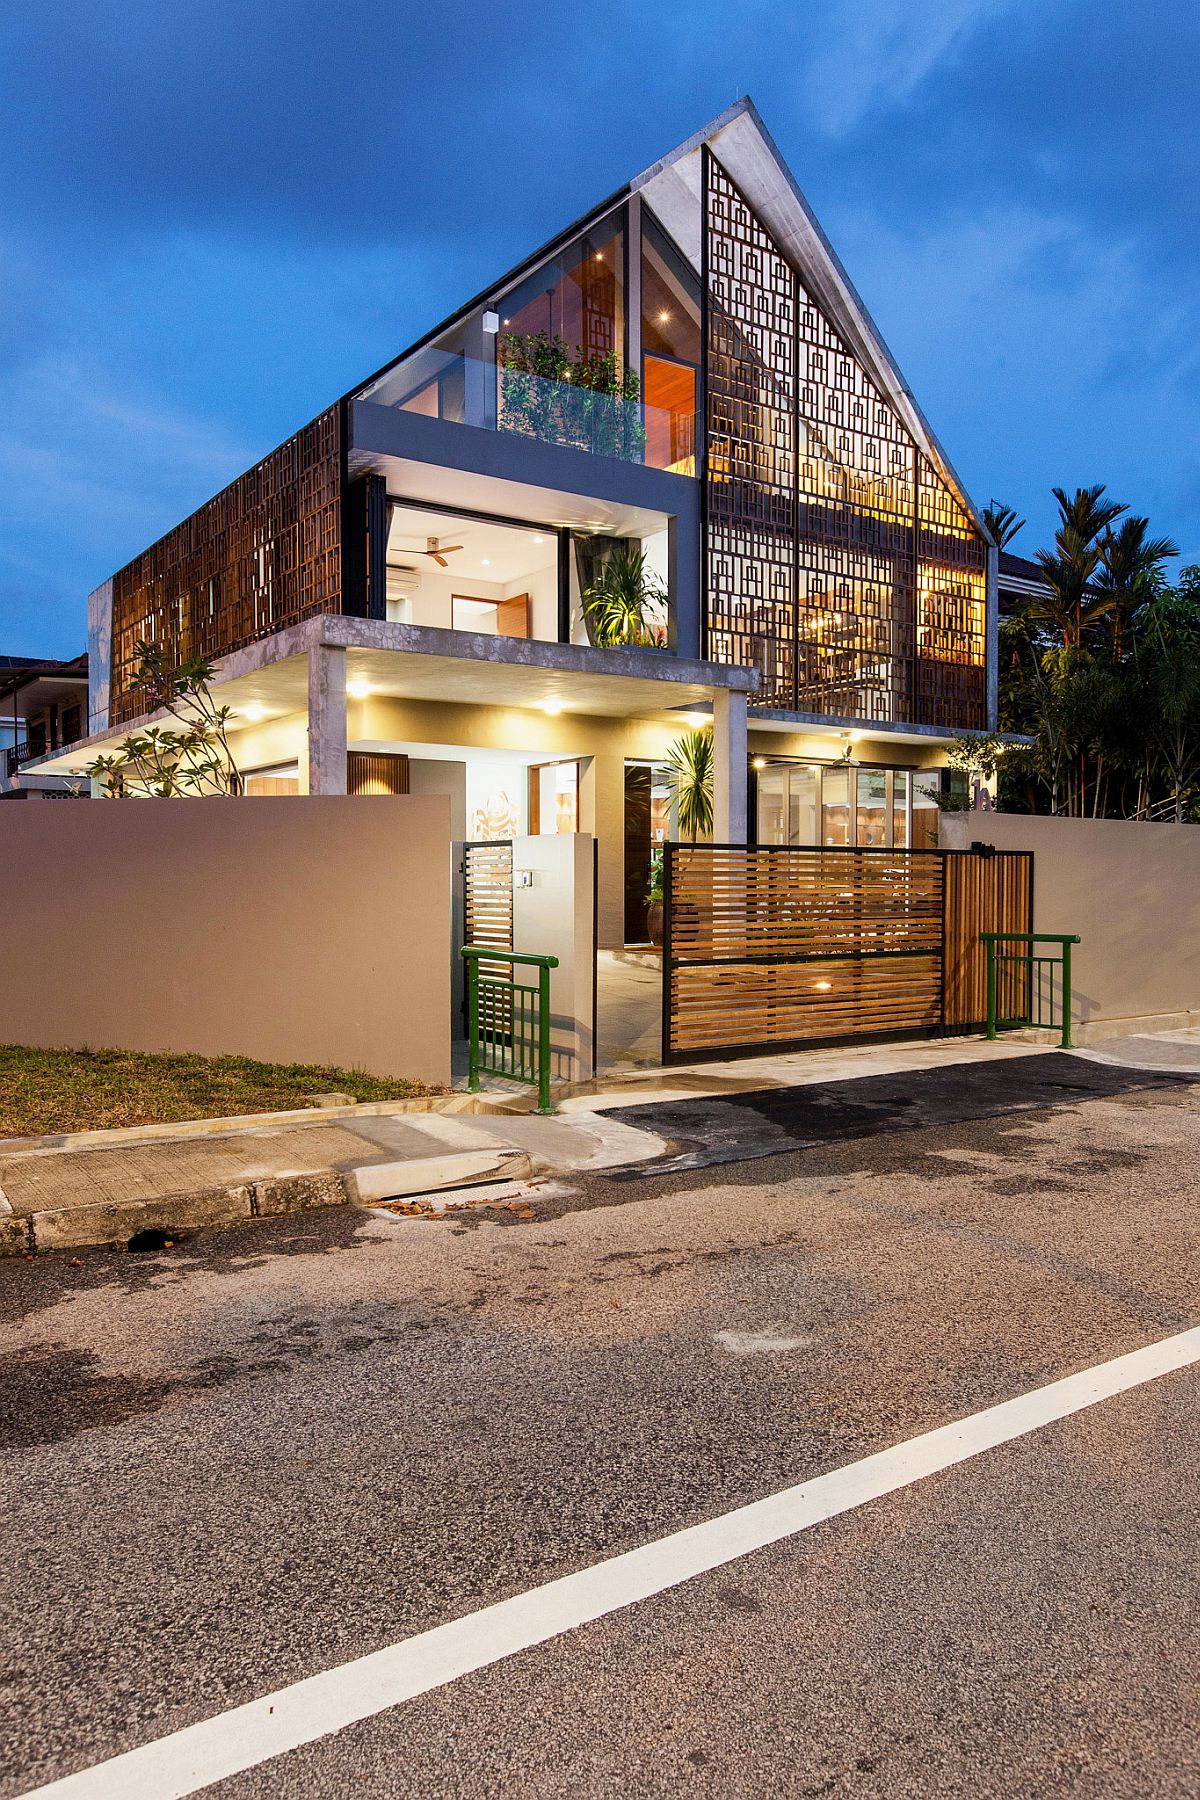 Lighting elevates the style quotient of the unique home in Singapore